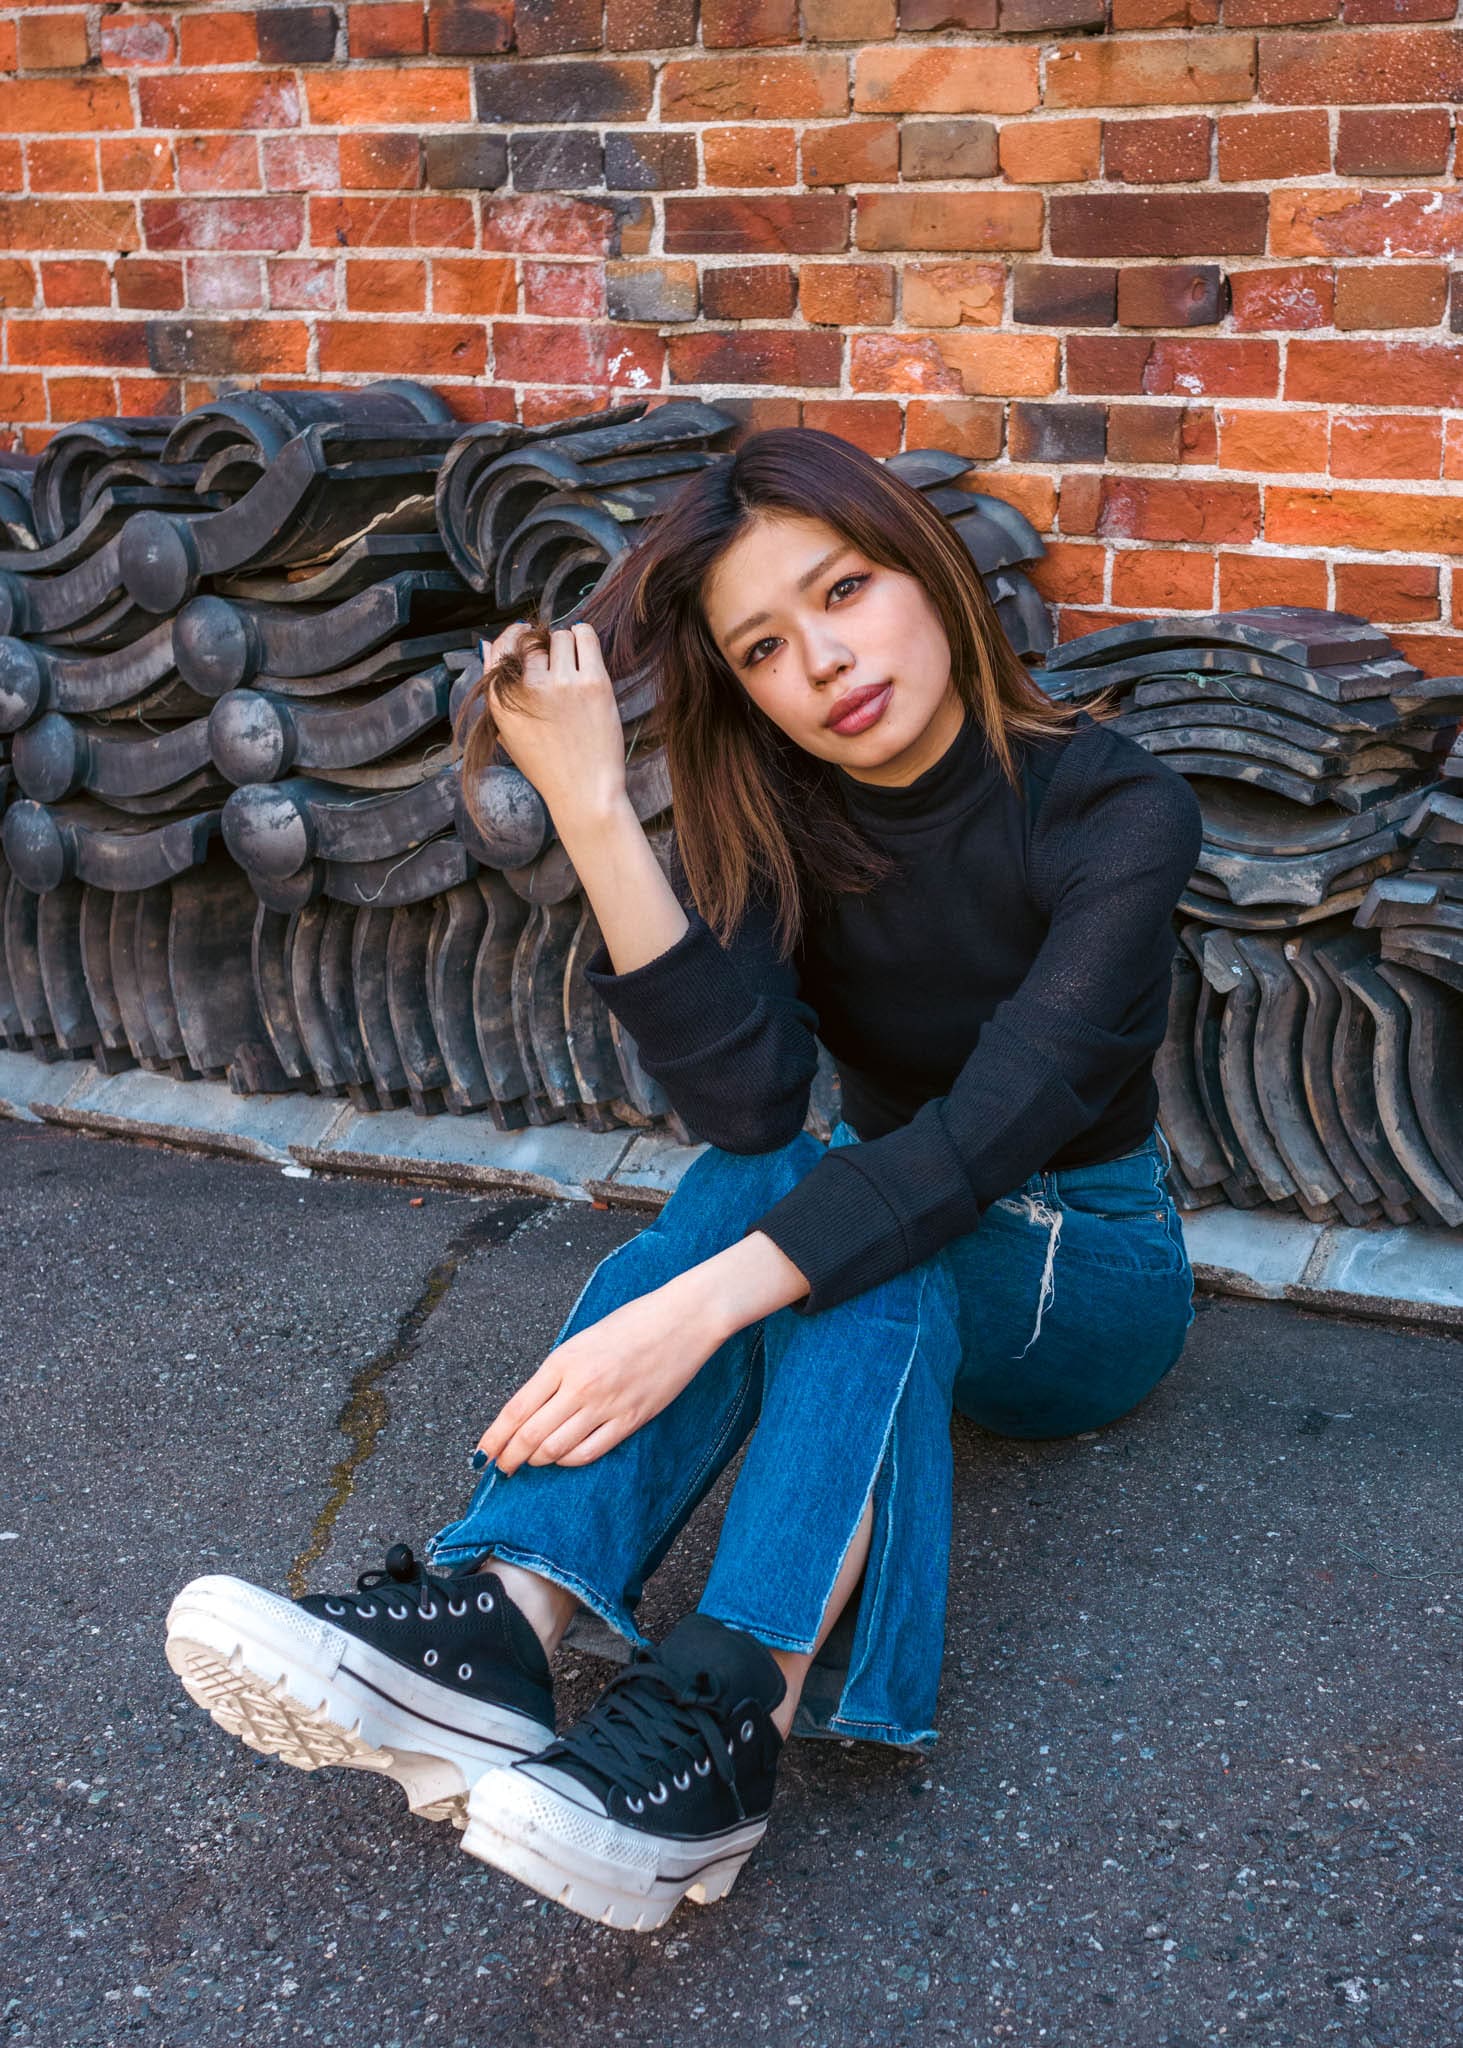 Young woman in black turtleneck and jeans sitting by brick wall with roofing tiles.